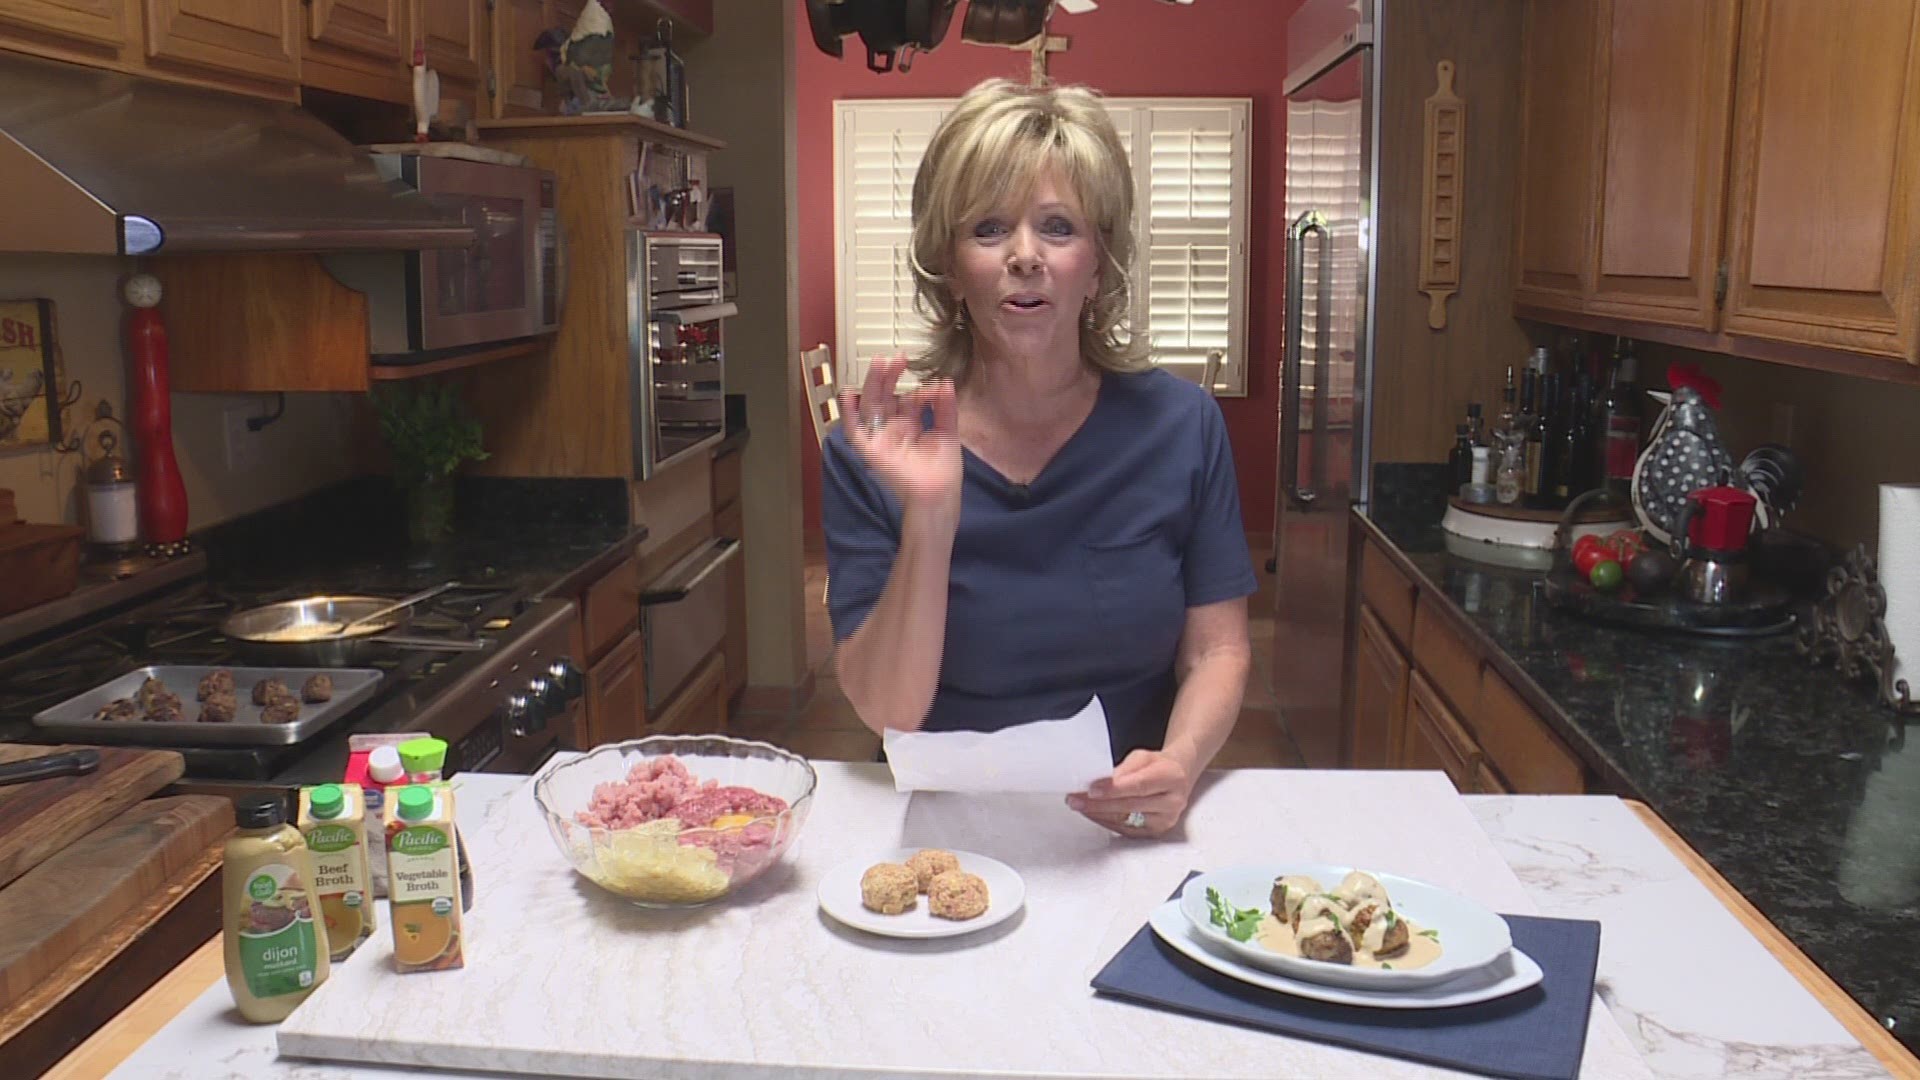 Jan shows us how to recreate the famous IKEA Swedish Meatballs at home!